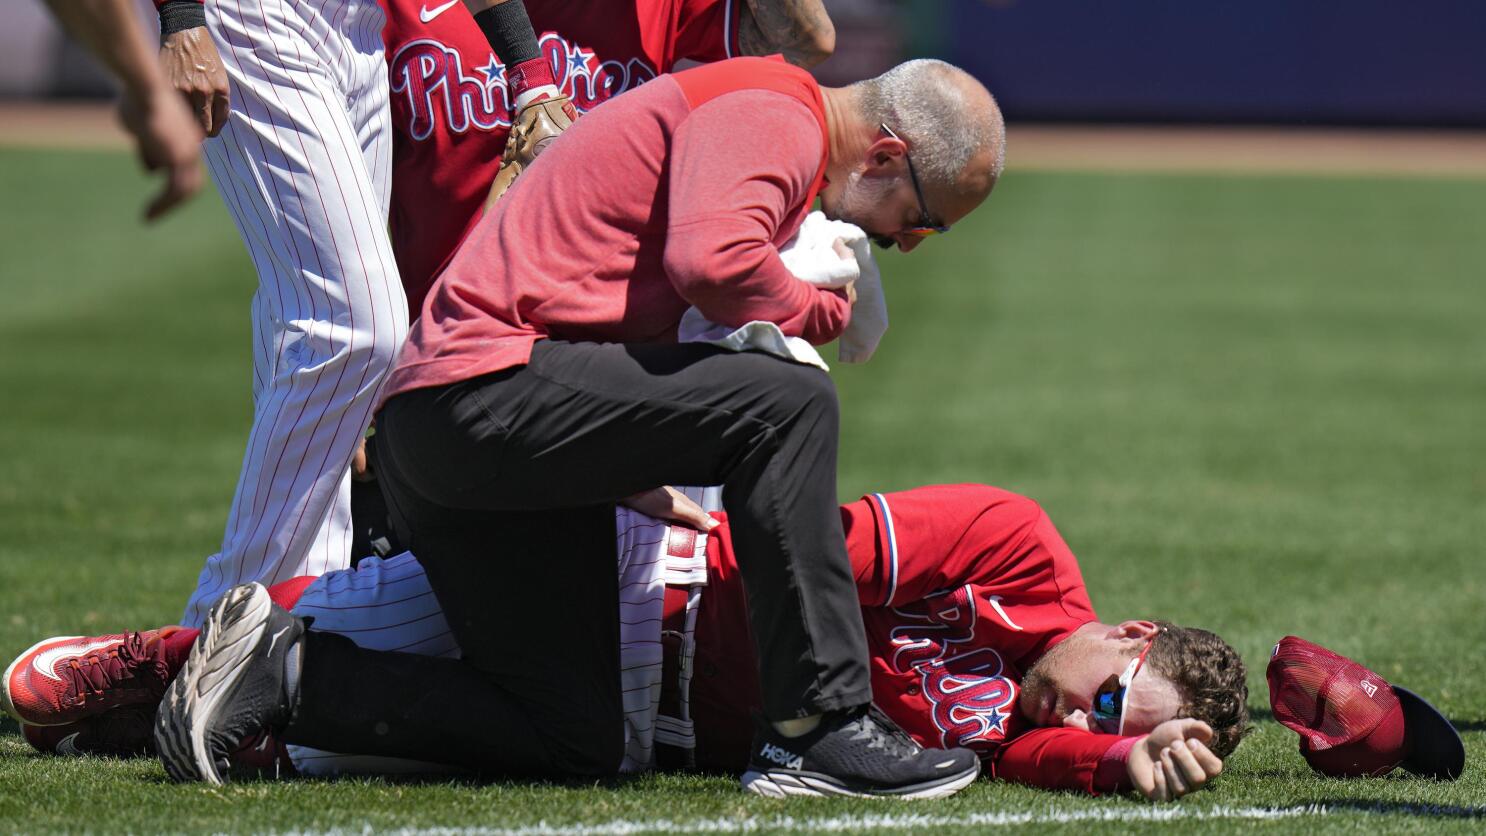 Phillies' Rhys Hoskins out for season with abdominal tear – The